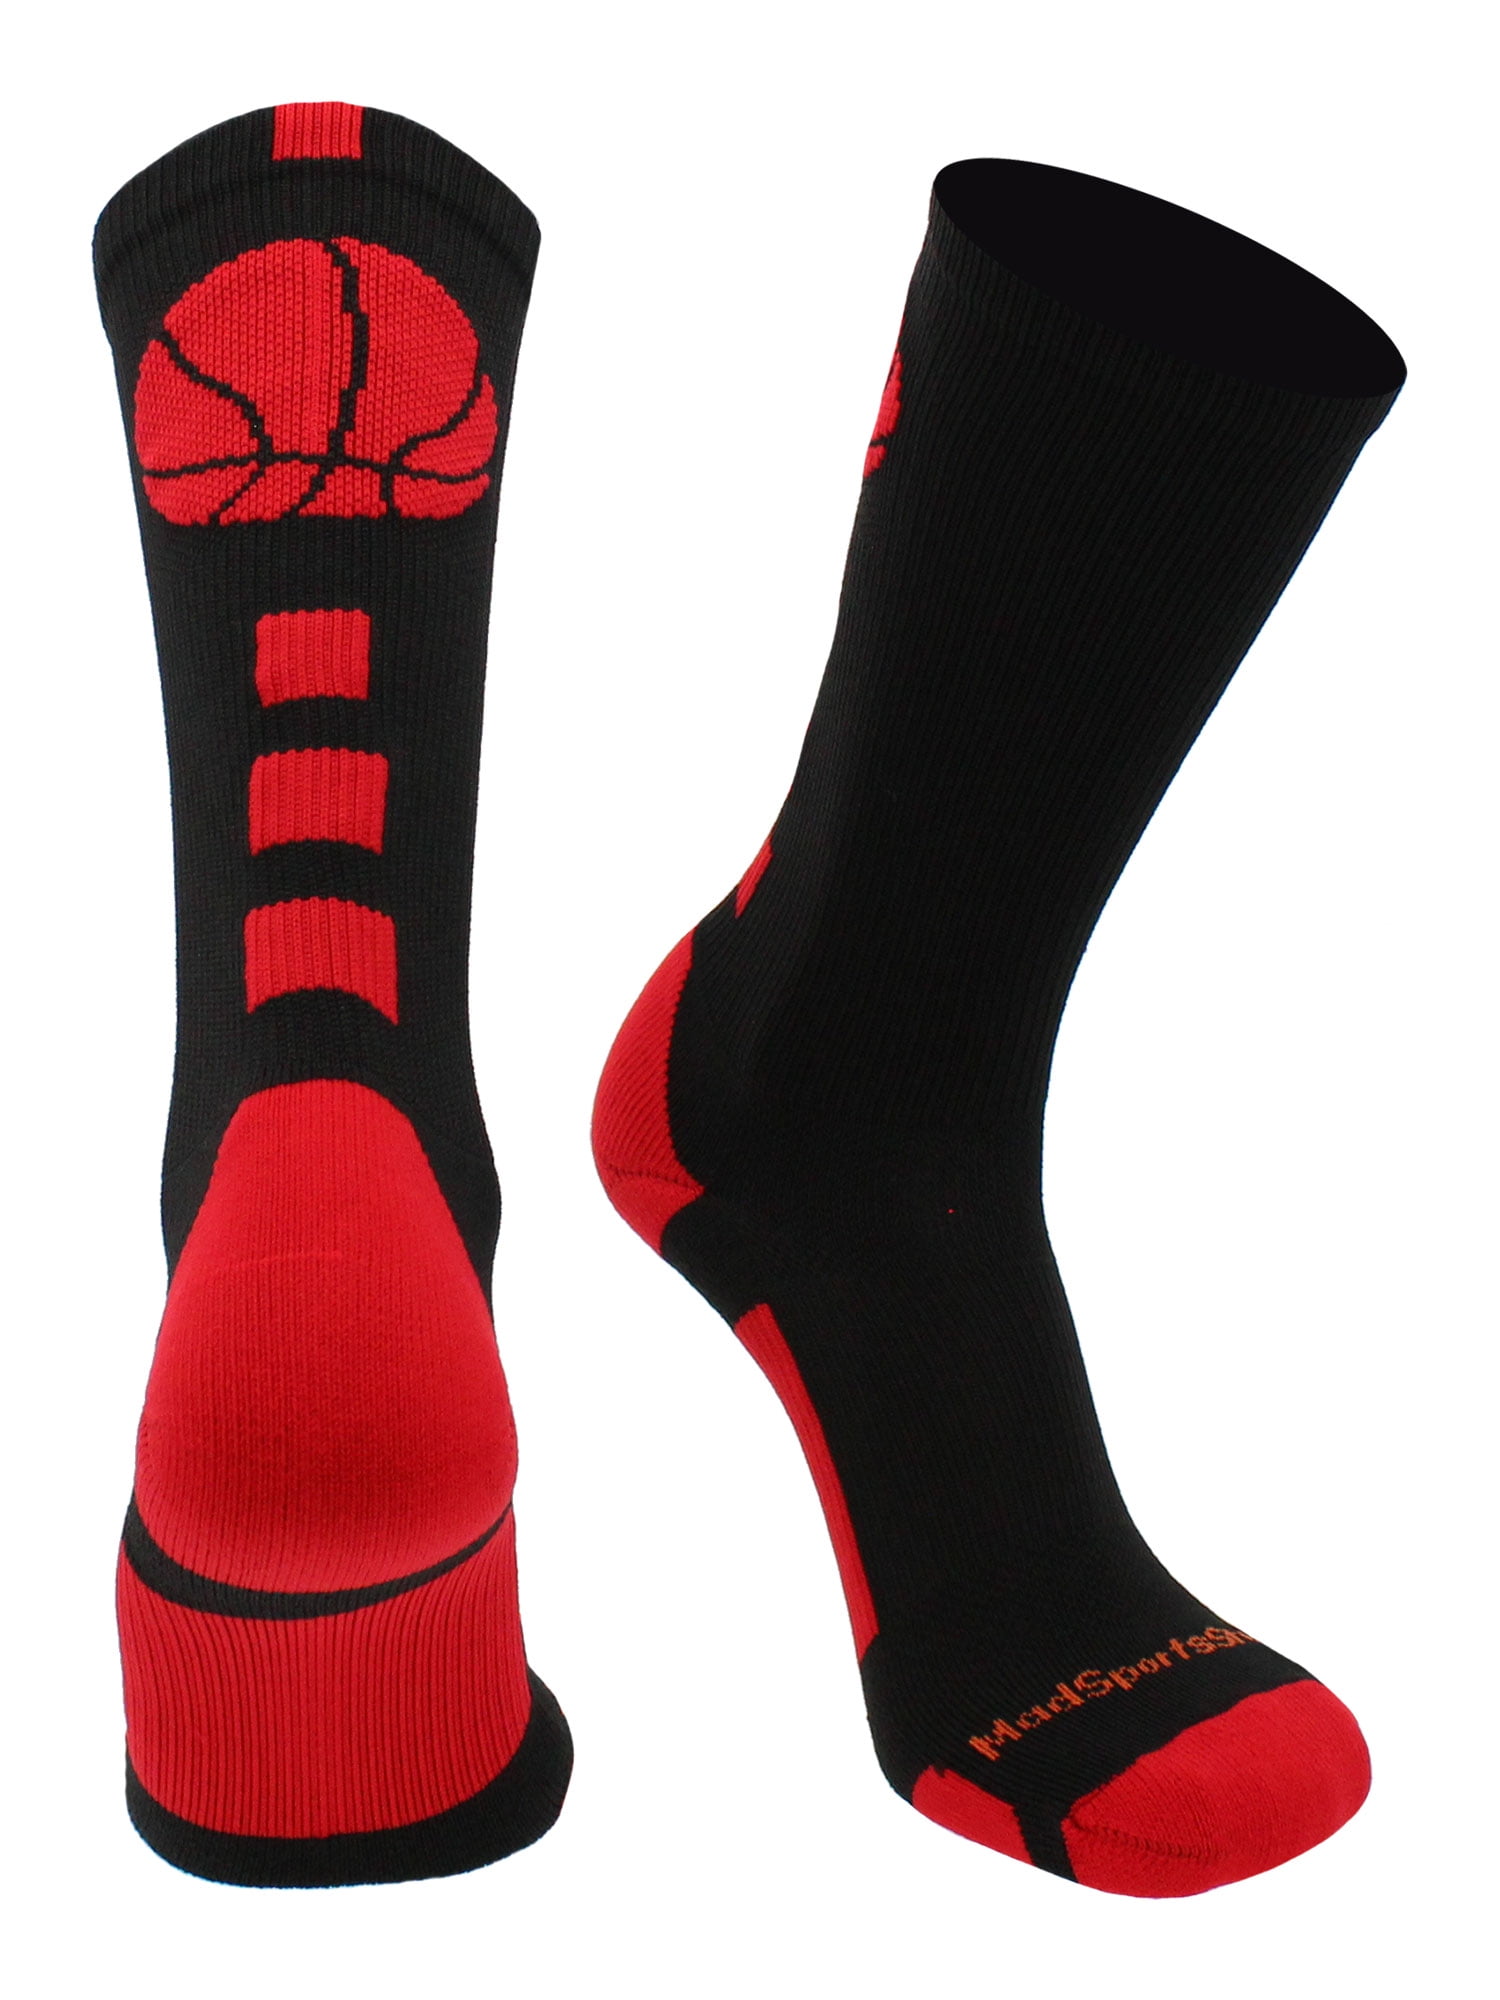 MadSportsStuff Black Player ID Custom Number Crew Socks for Basketball Lacrosse Volleyball Boys and Girls 